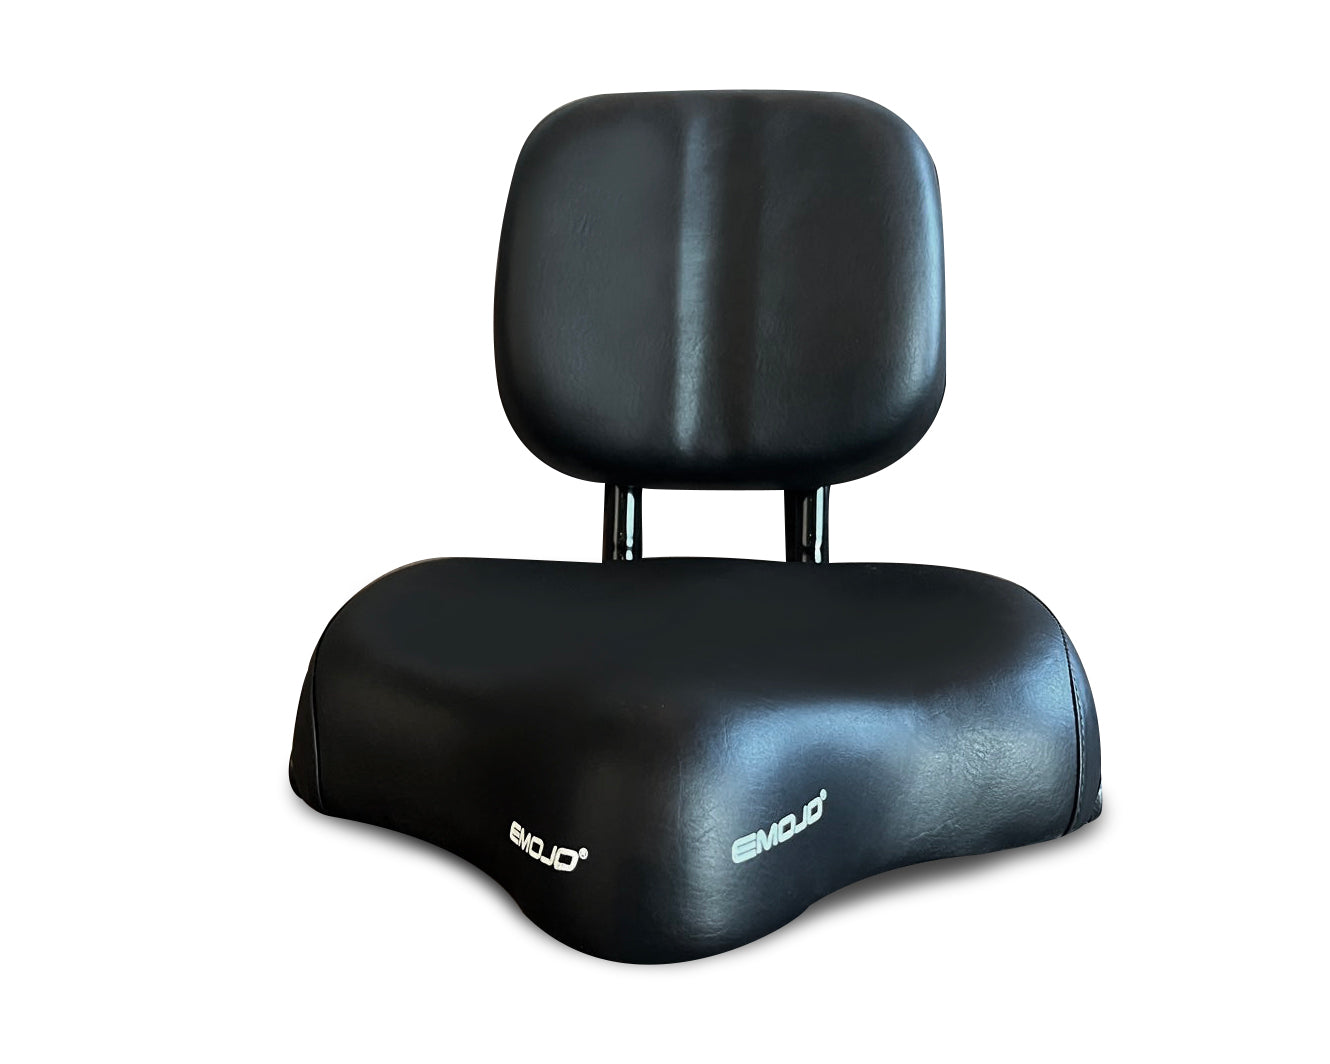 Bike Seat with Backrest Bicycle Seat Cushion Parts Durable Electric Bicycle